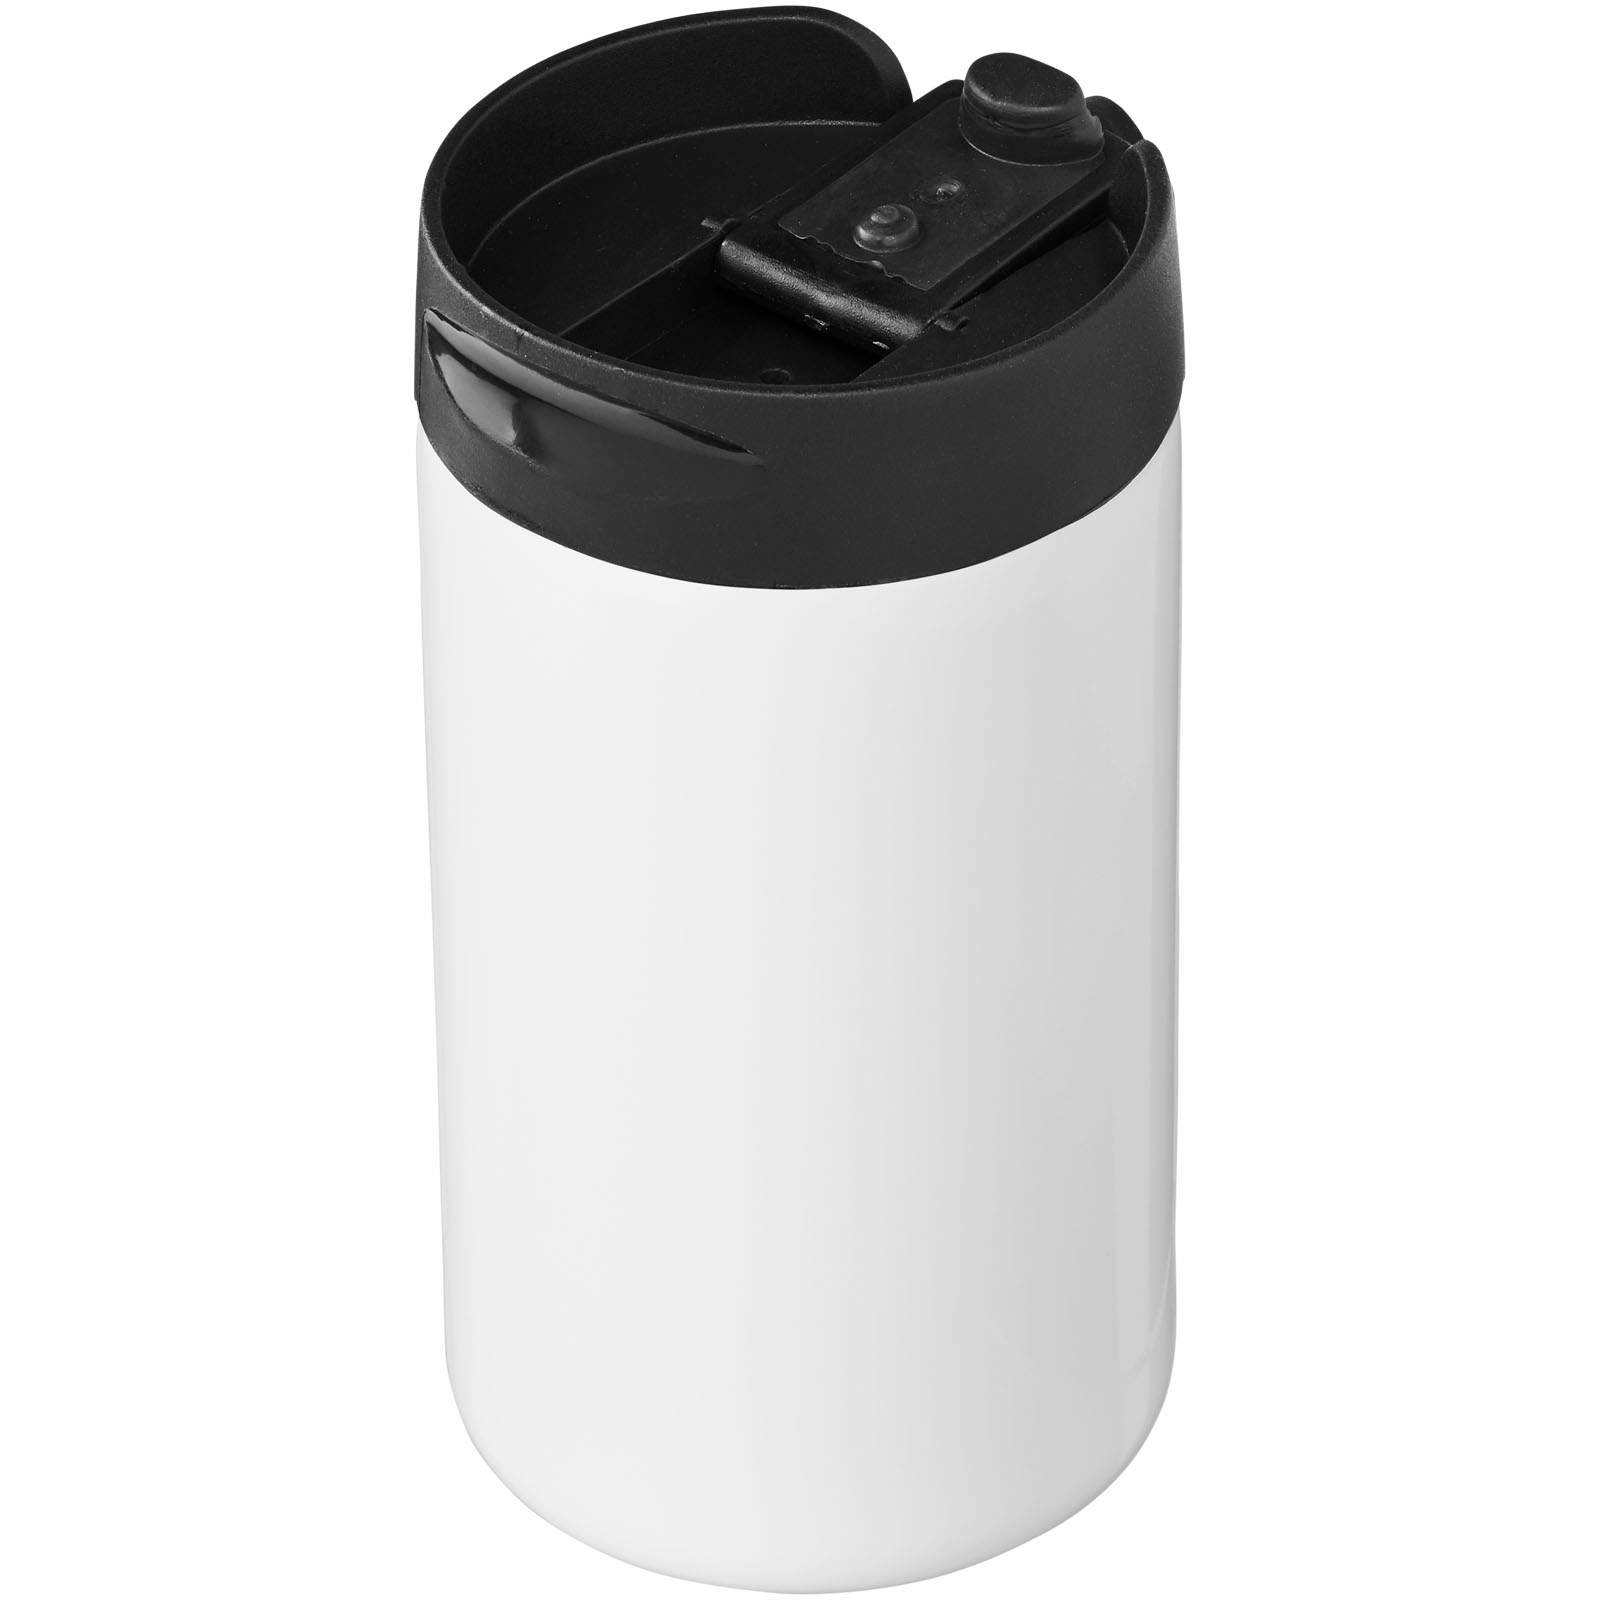 Travel mugs - Mojave 250 ml RCS certified recycled stainless steel insulated tumbler